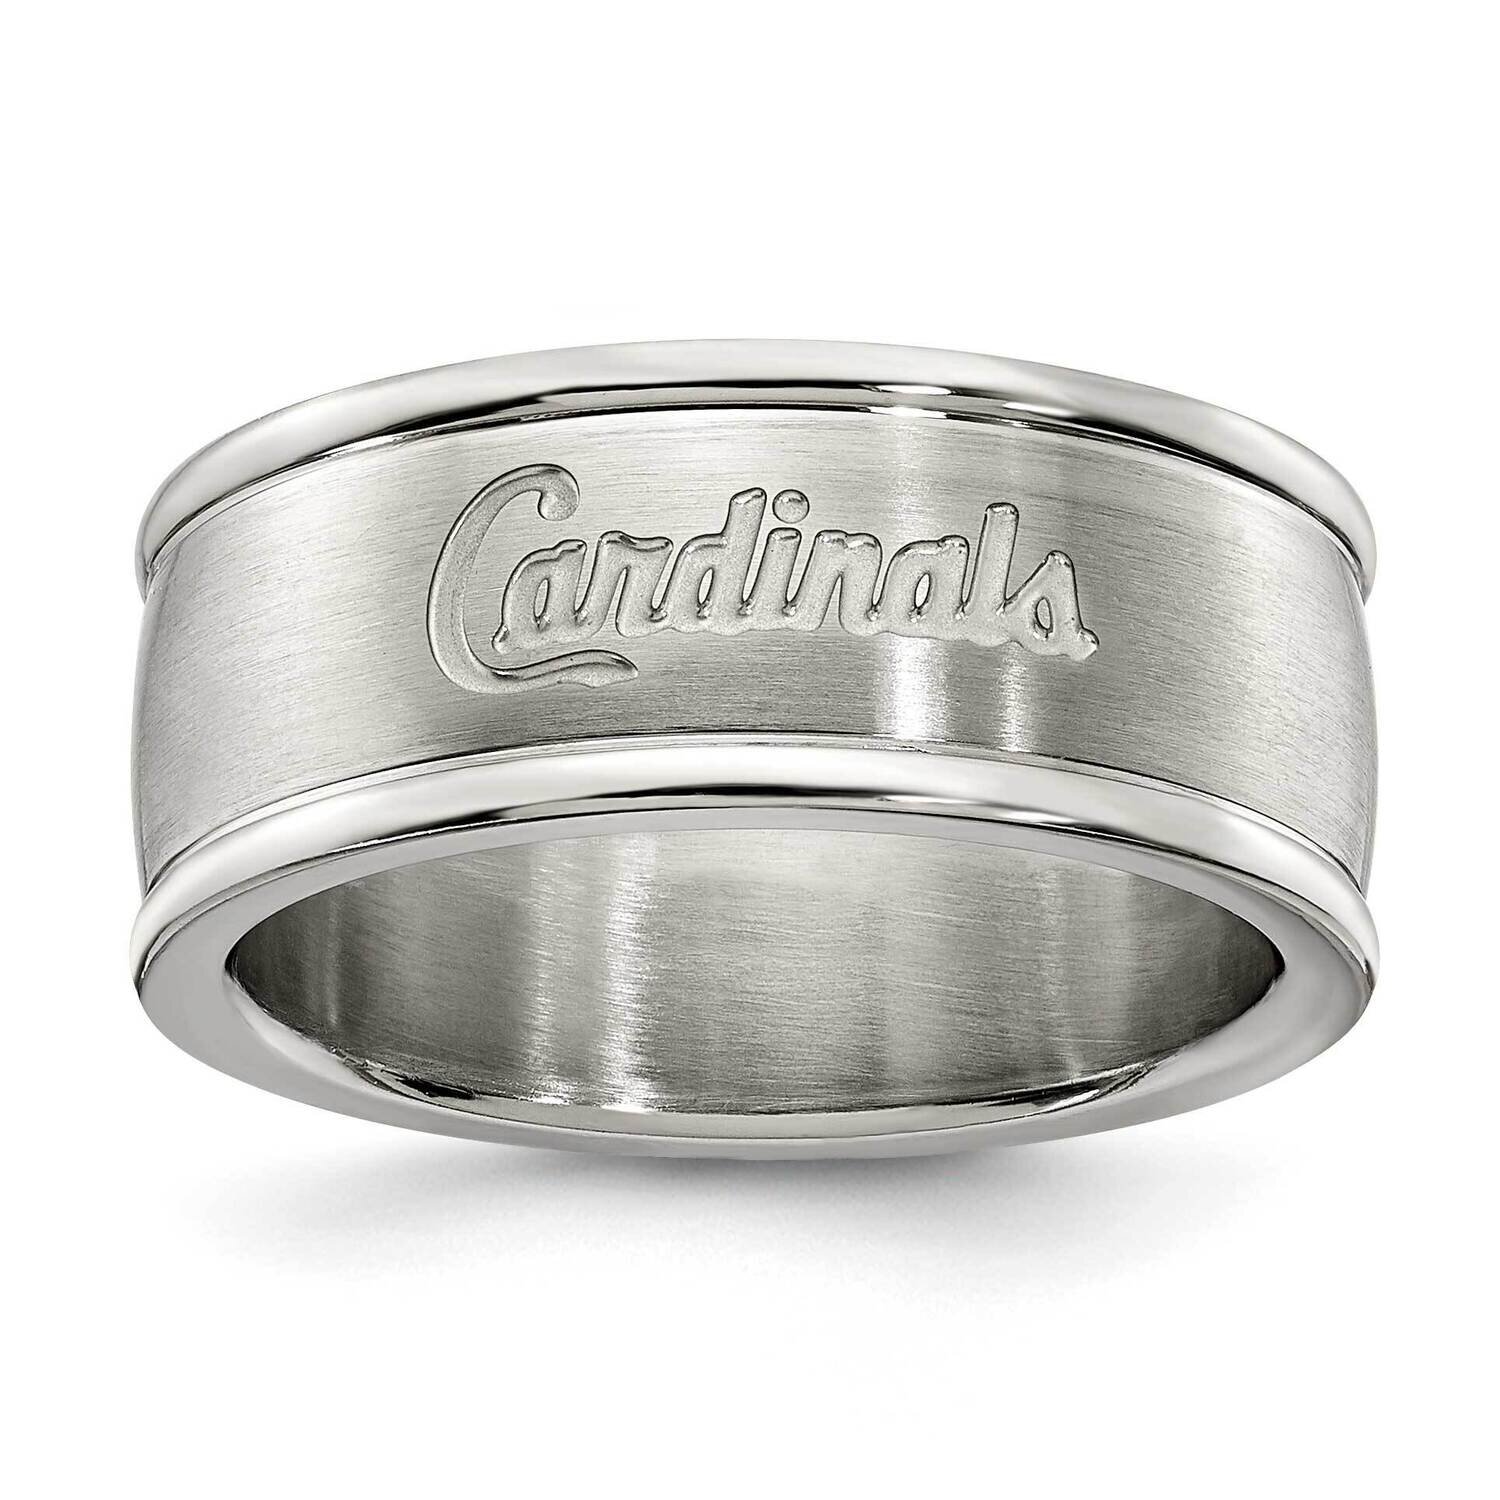 St Louis Cardinals Logo Band Ring Stainless Steel CRD035-SZ6